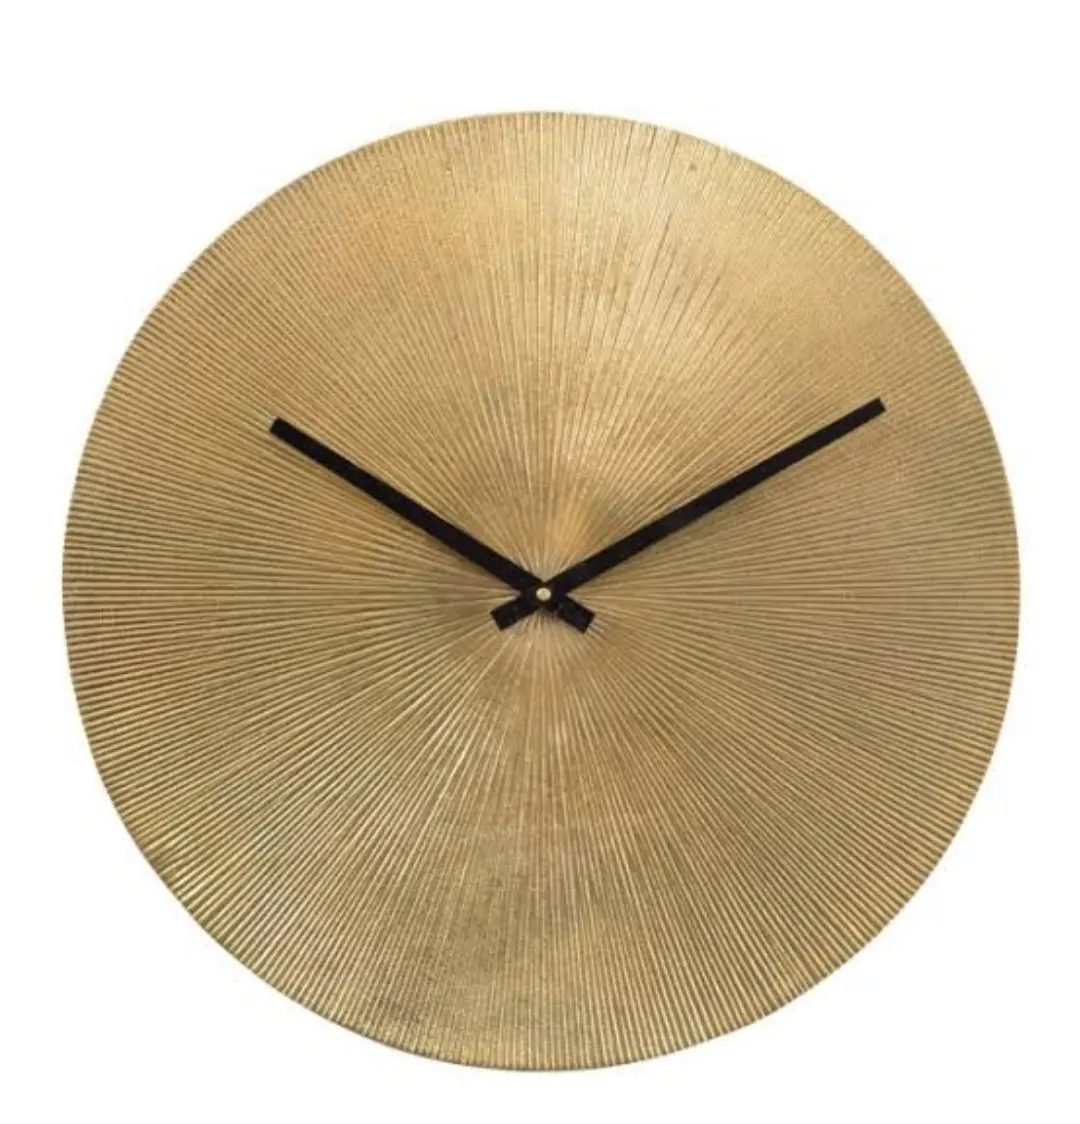 12 inch new design metal wall clock for home office living room decoration